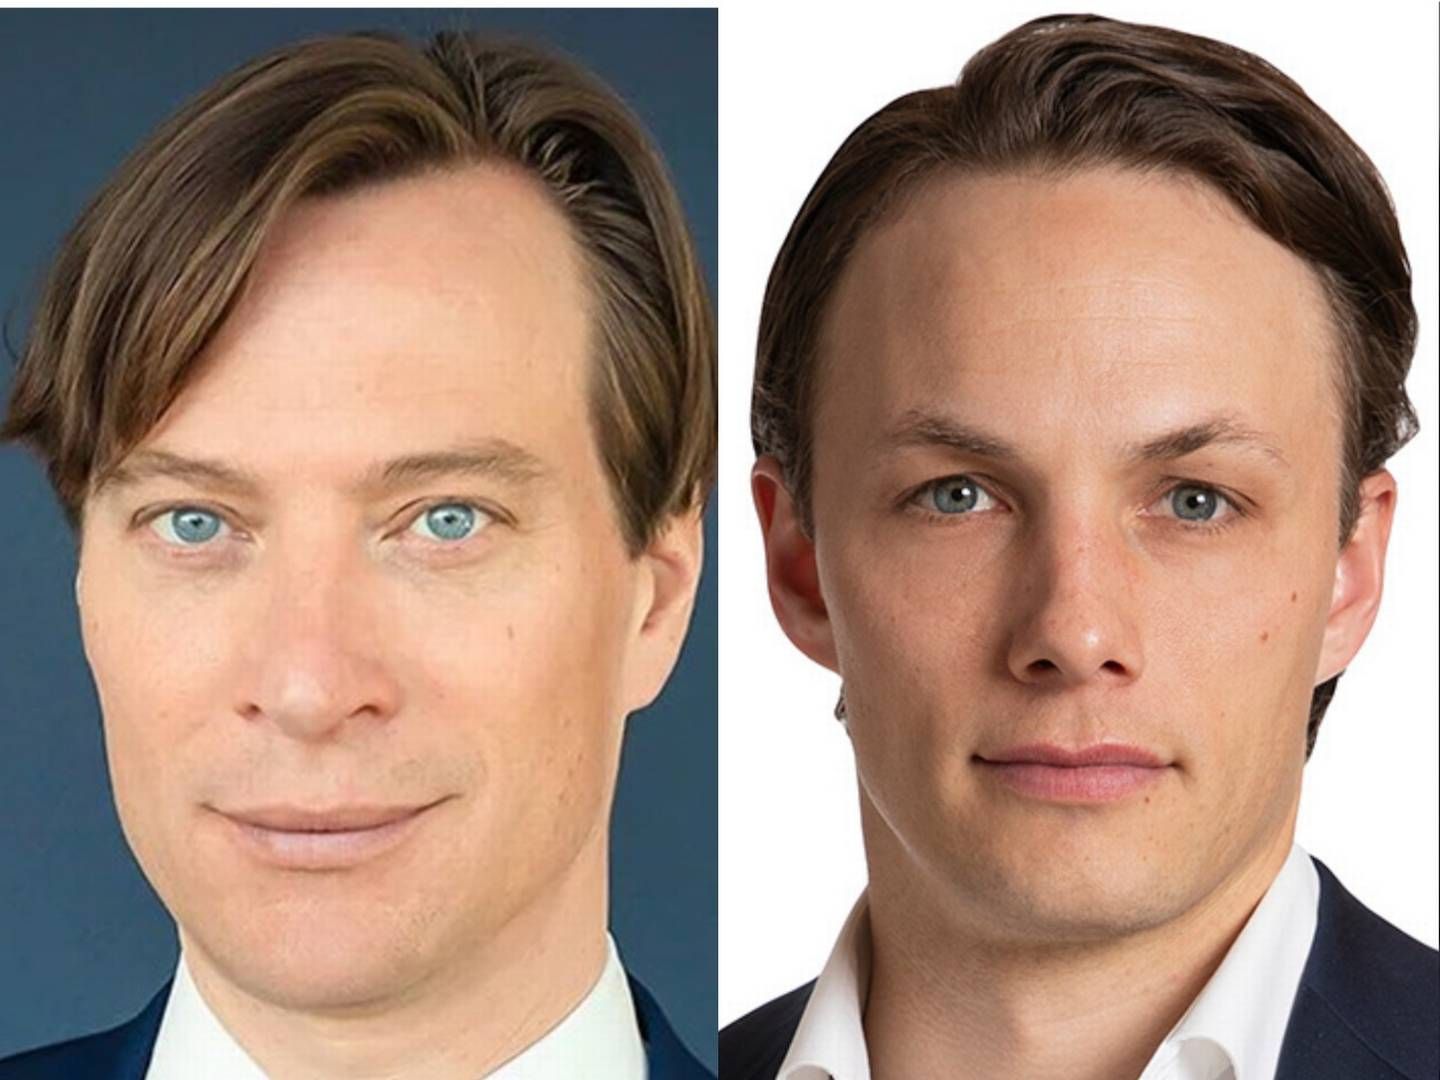 Gustaf Rentzhog, CEO and one of the founders of Söderberg & Partners, Hans Arstad, Managing Director at KKR, and Chris Parkin, Managing Director and co-head of Business Services at TA Associates. | Foto: PR / Söderberg & Partners, KKR and TA Associates.